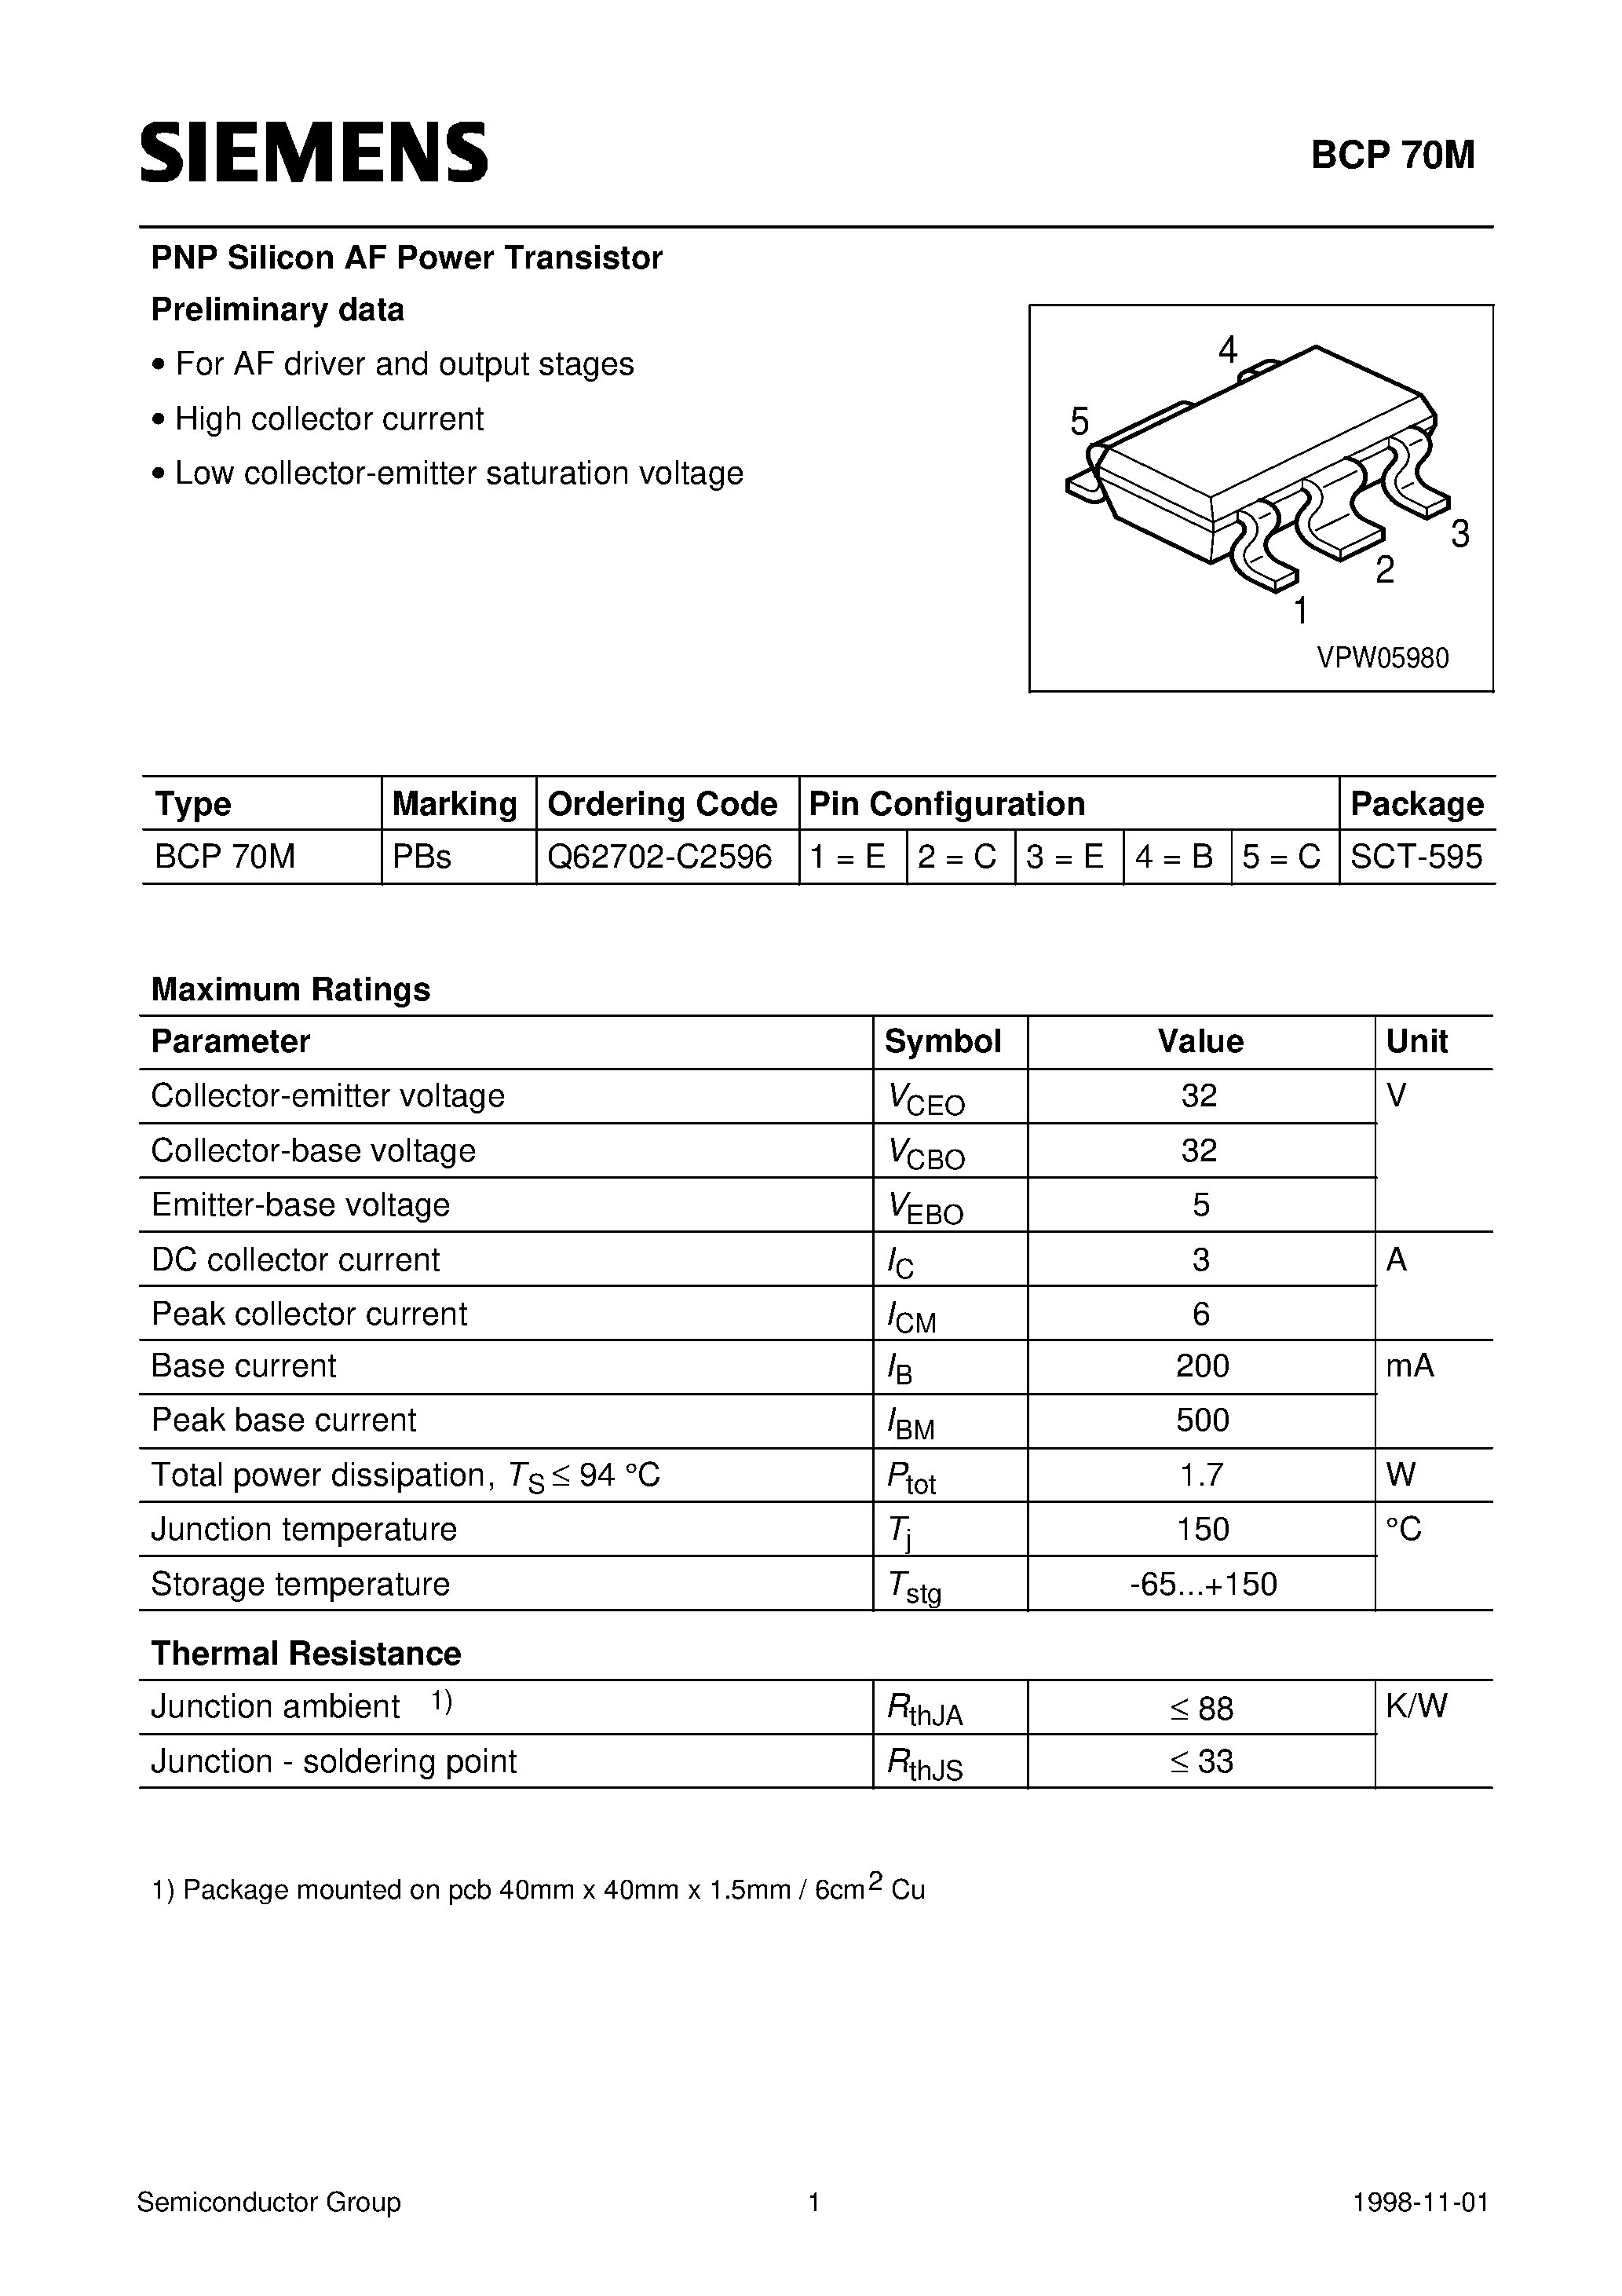 Datasheet BCP70 - PNP Silicon AF Power Transistor (For AF driver and output stages High collector current) page 1